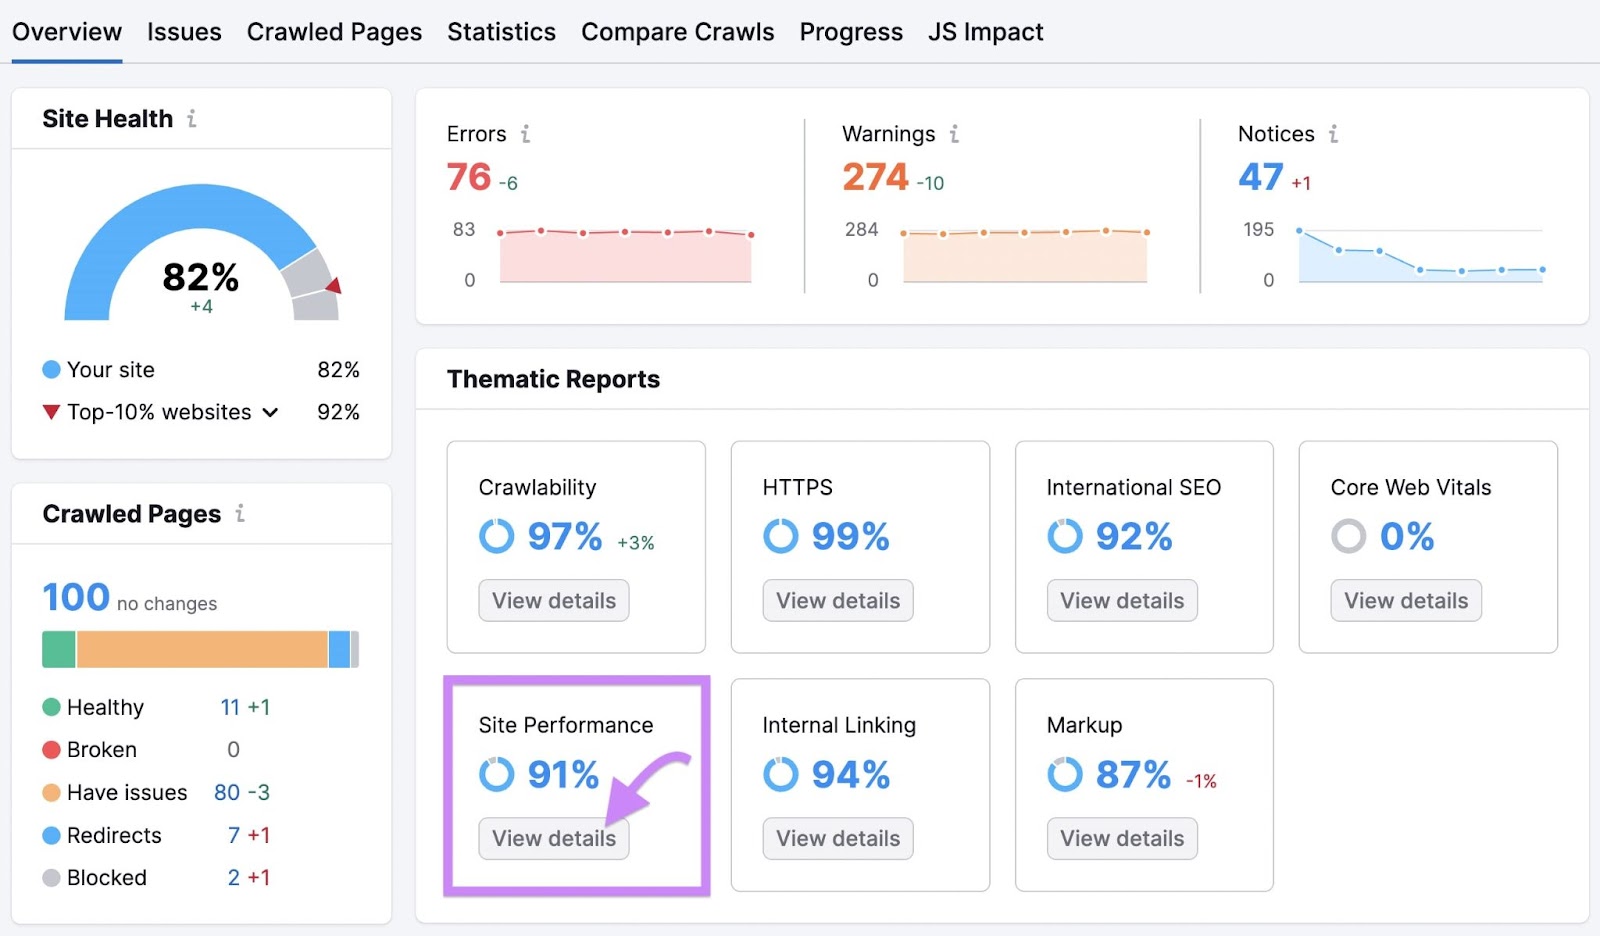 "Site Performance" widget highlighted nether  "Thematic Reports" conception  successful  Site Audit tool